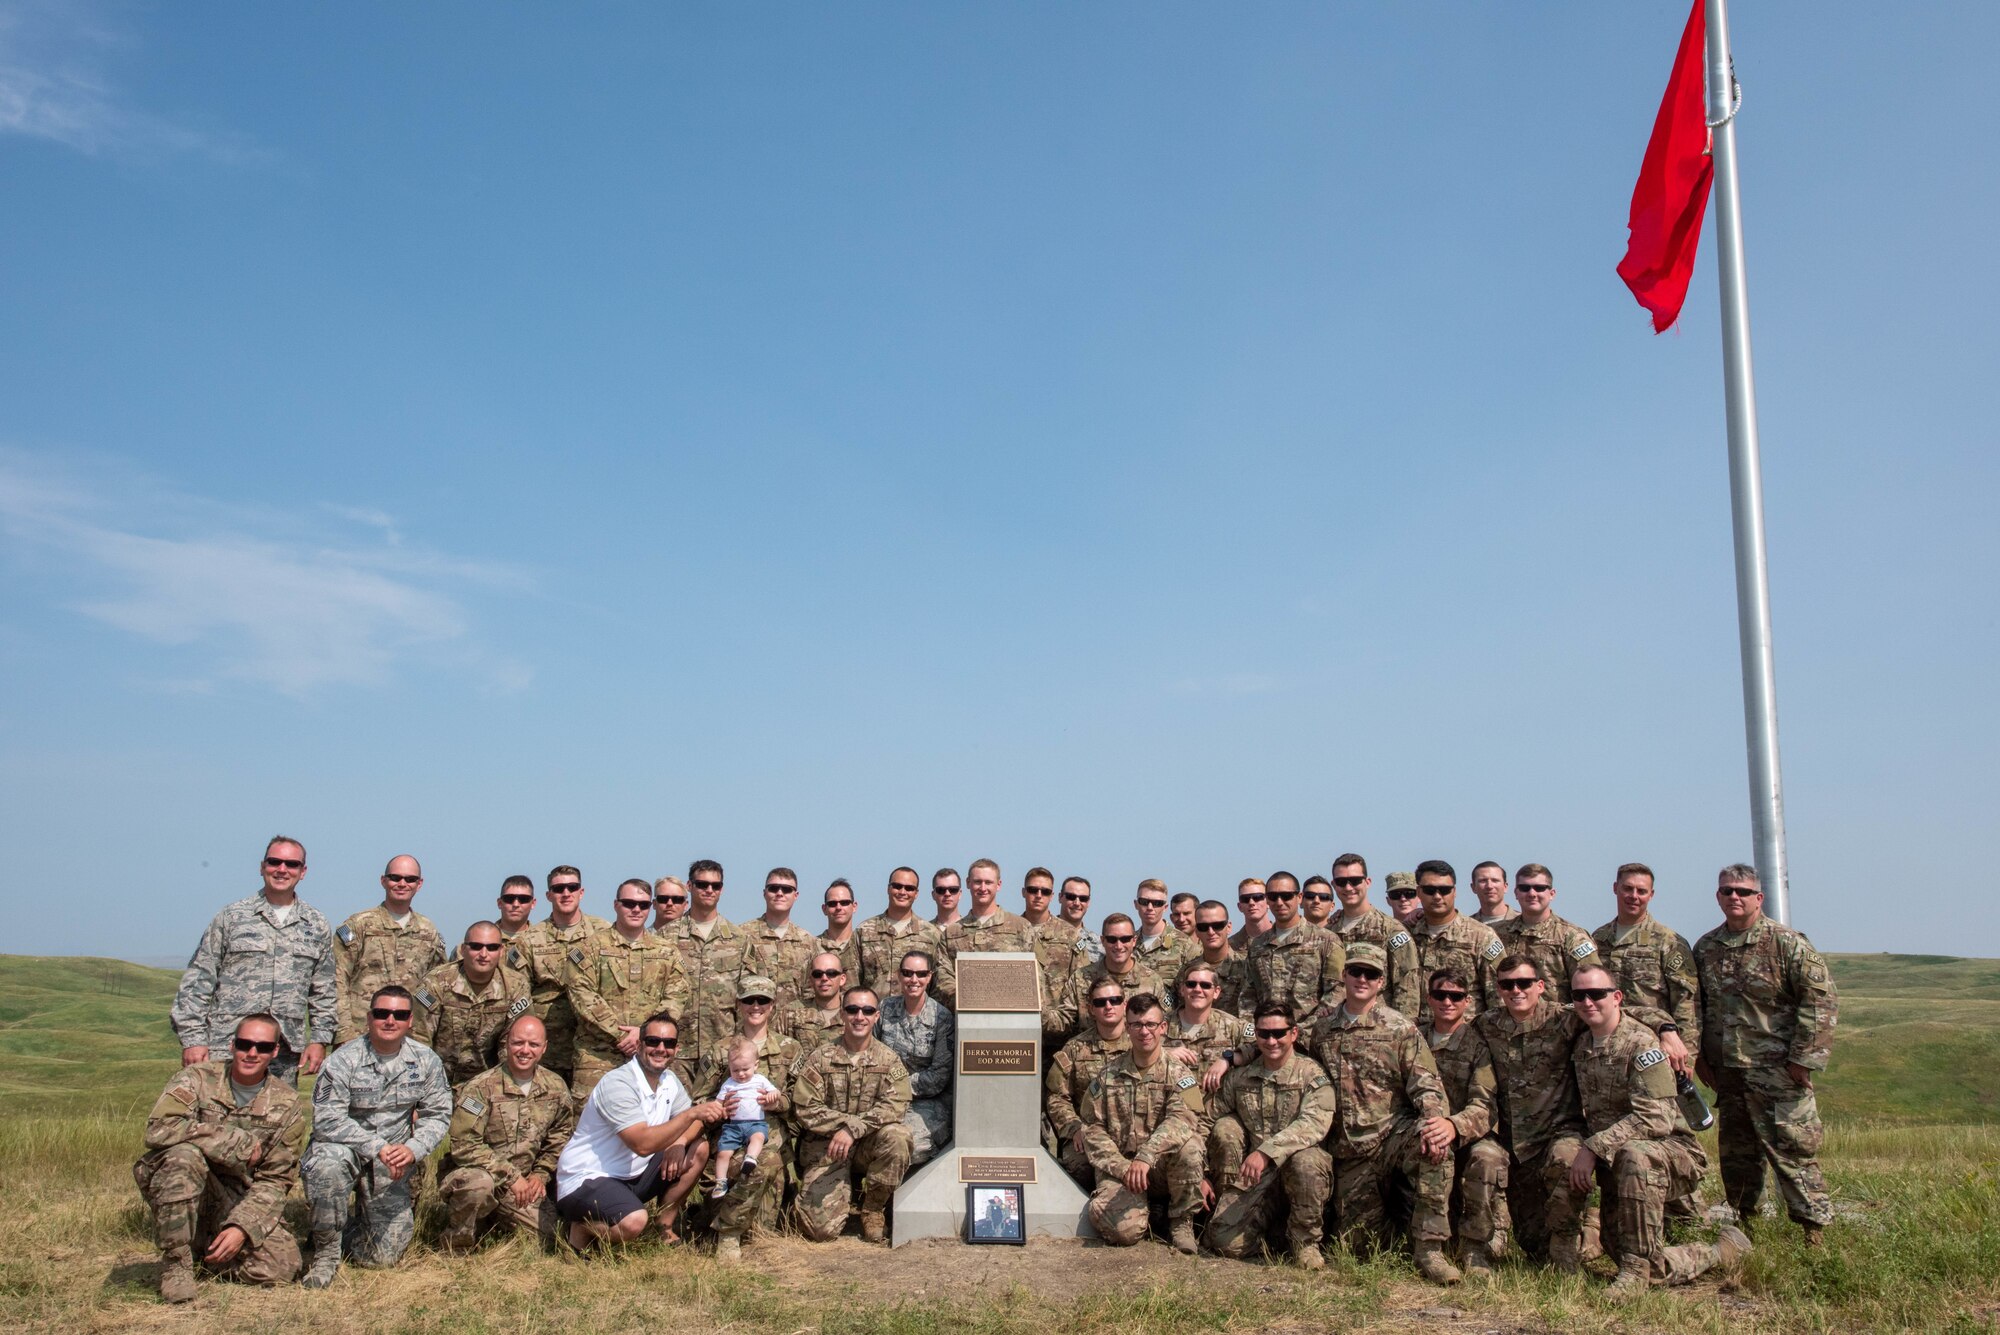 The 28th Civil Engineer Squadron explosive ordnance disposal flight and visiting EOD members stand next to a memorial plaque for Staff Sgt. Bryan D. Berky following an EOD range dedication ceremony at Ellsworth Air Force Base, S.D. Aug. 17, 2018. The range was named in honor of Berky, an EOD technician deployed from Ellsworth AFB who was killed in action on Sept. 12, 2009, while serving in the western province of Farah, Afghanistan. (U.S. Air Force photo by Tech. Sgt. Jette Carr)